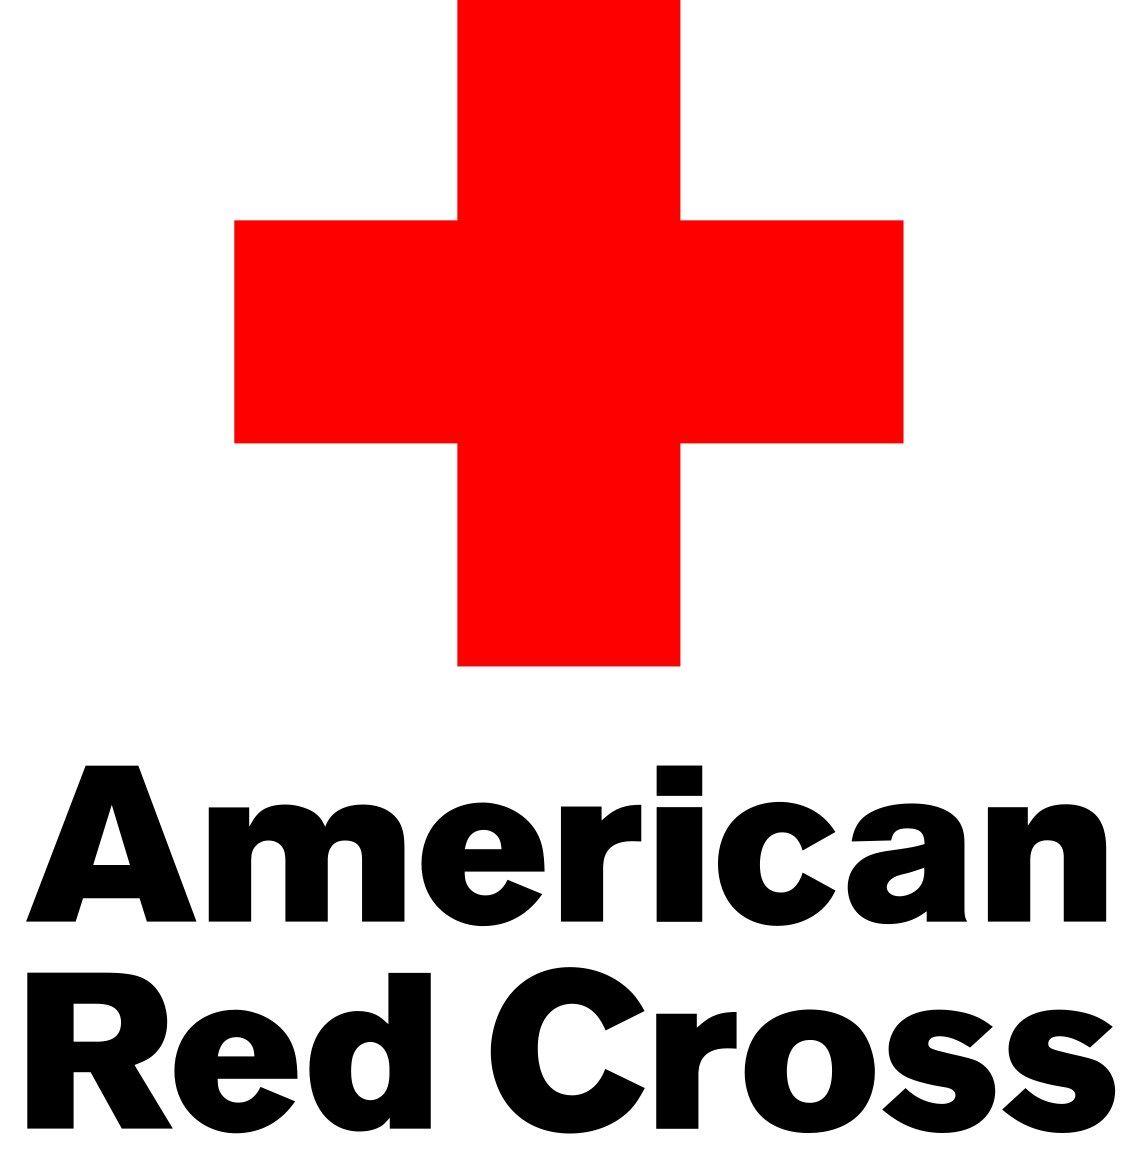 American Red Crss Logo - logo-American-Red-Cross - Meyers Brothers Kalicka